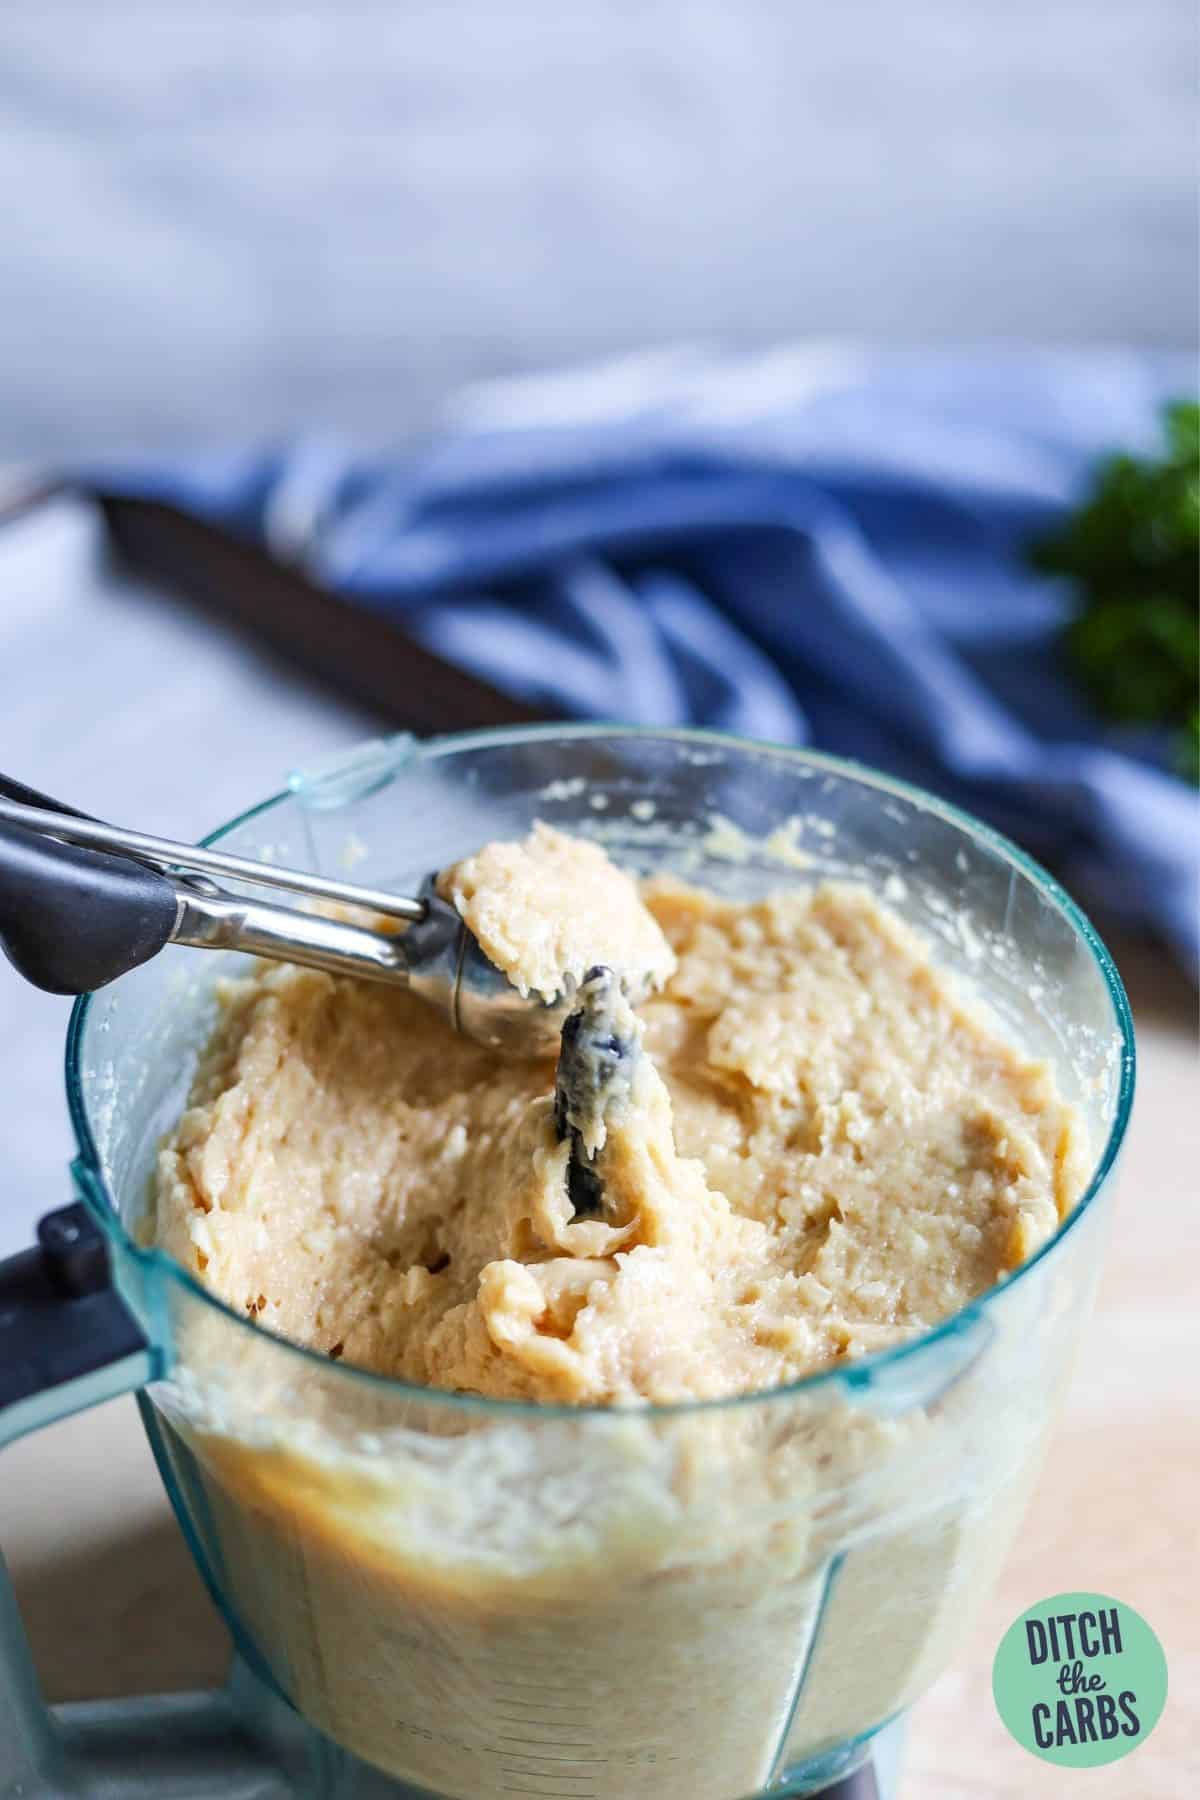 scooping the cheesy chicken meatball mixture high-protein low-carb (HPLC)